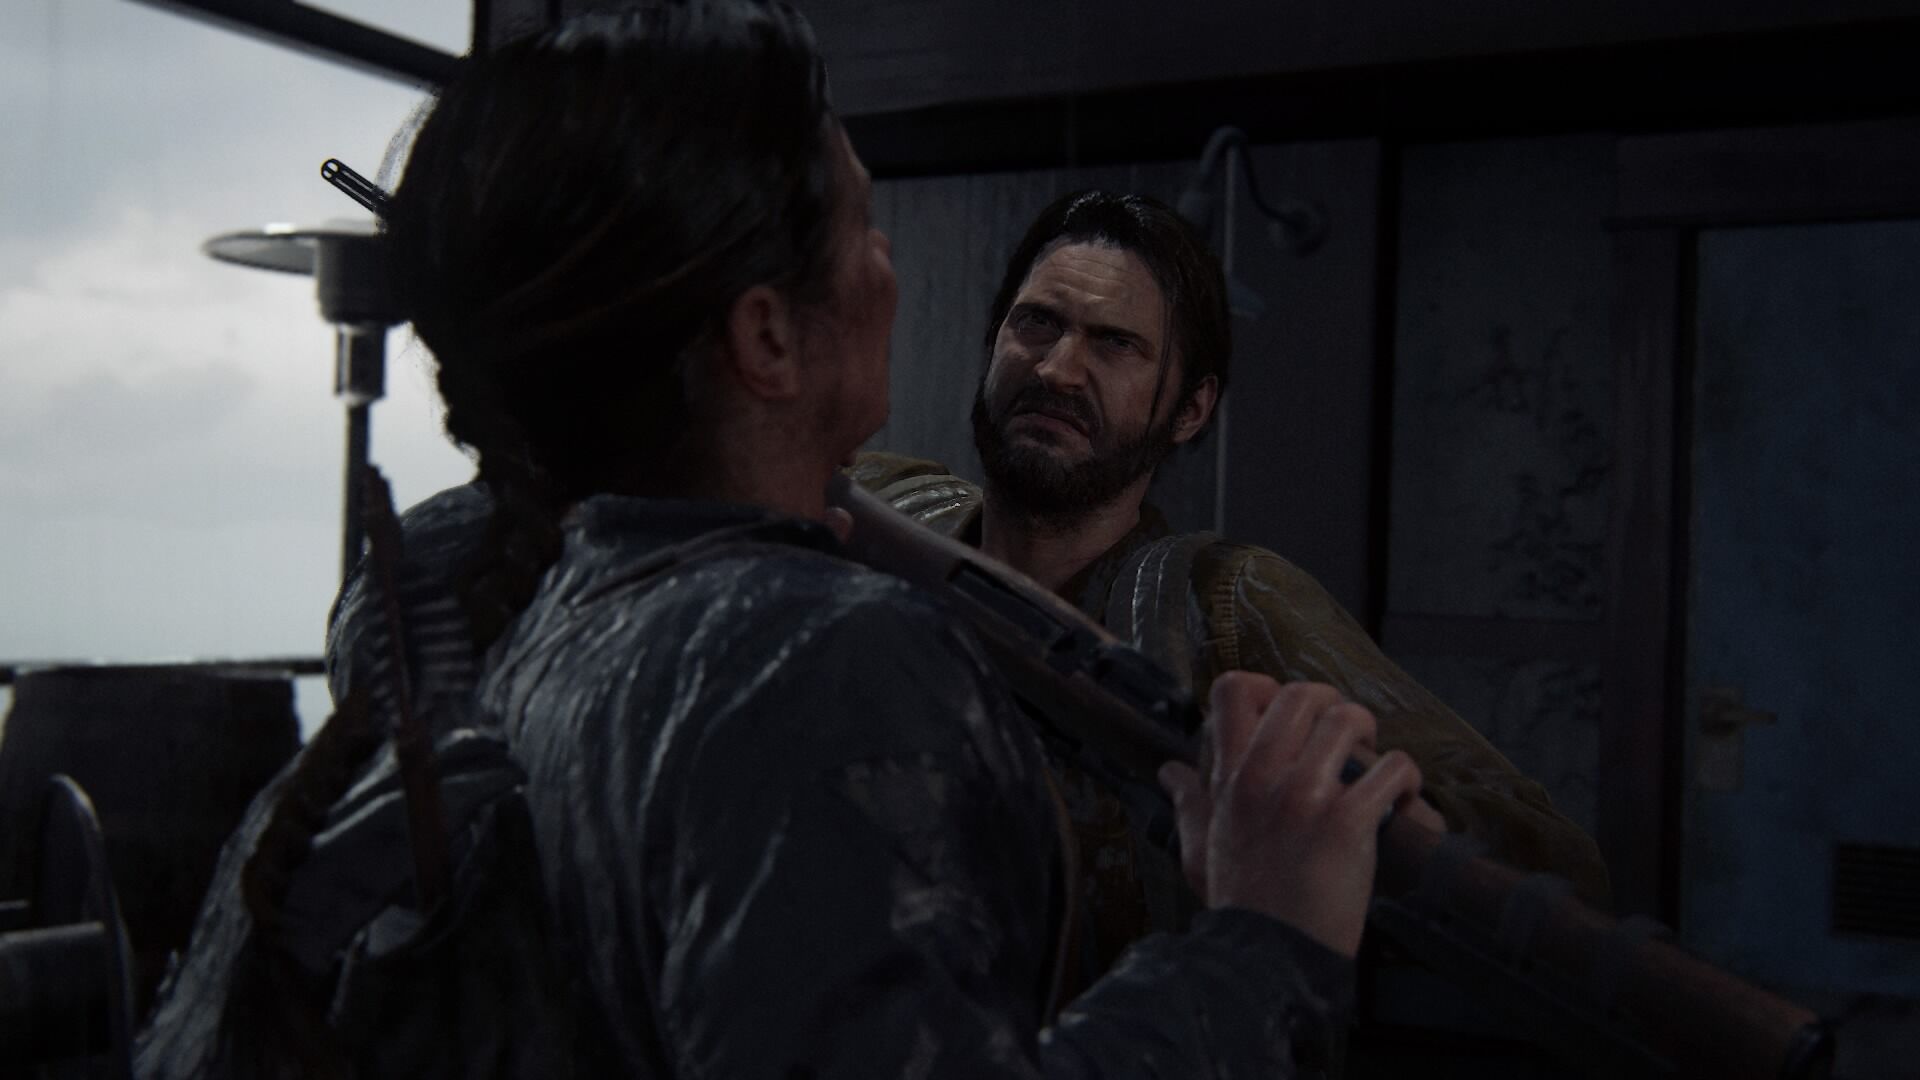 The Last of Us Part II: Tommy  The last of us, Apocalypse character, Tommy